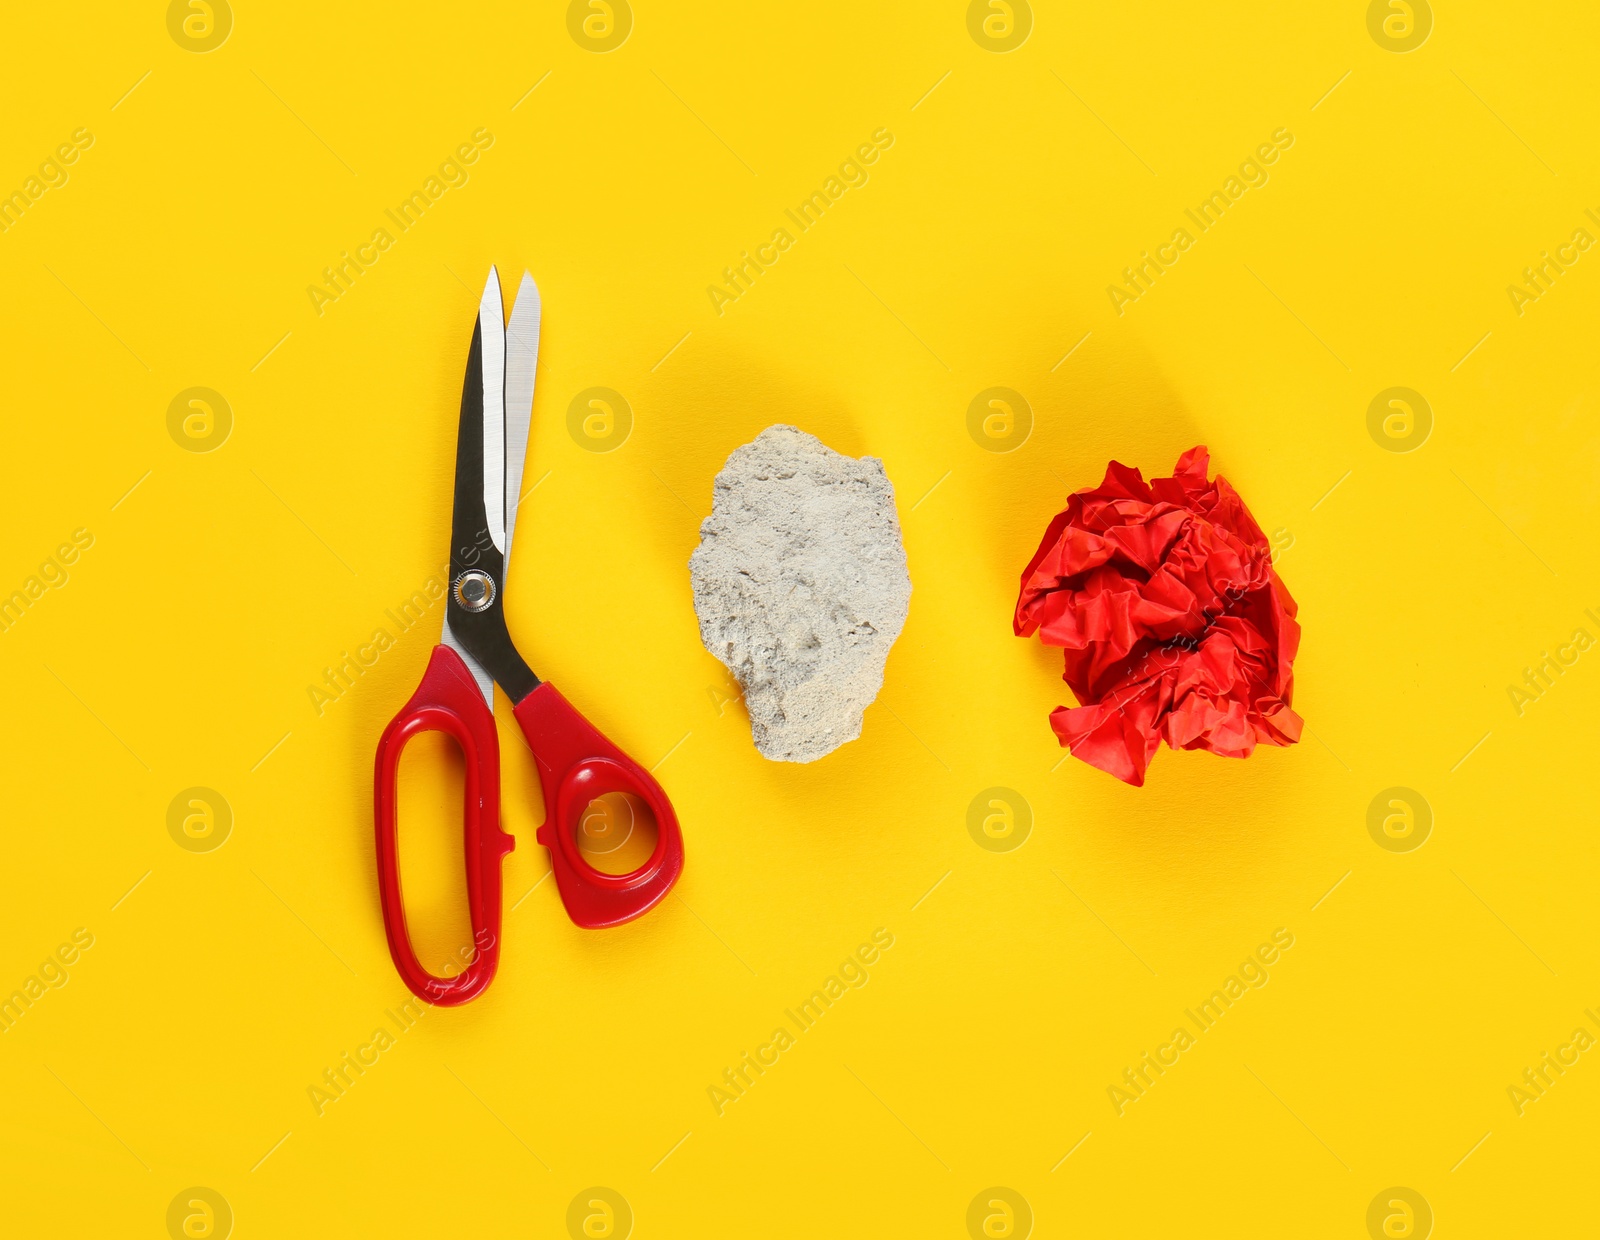 Photo of Flat lay composition with rock, paper and scissors on yellow background